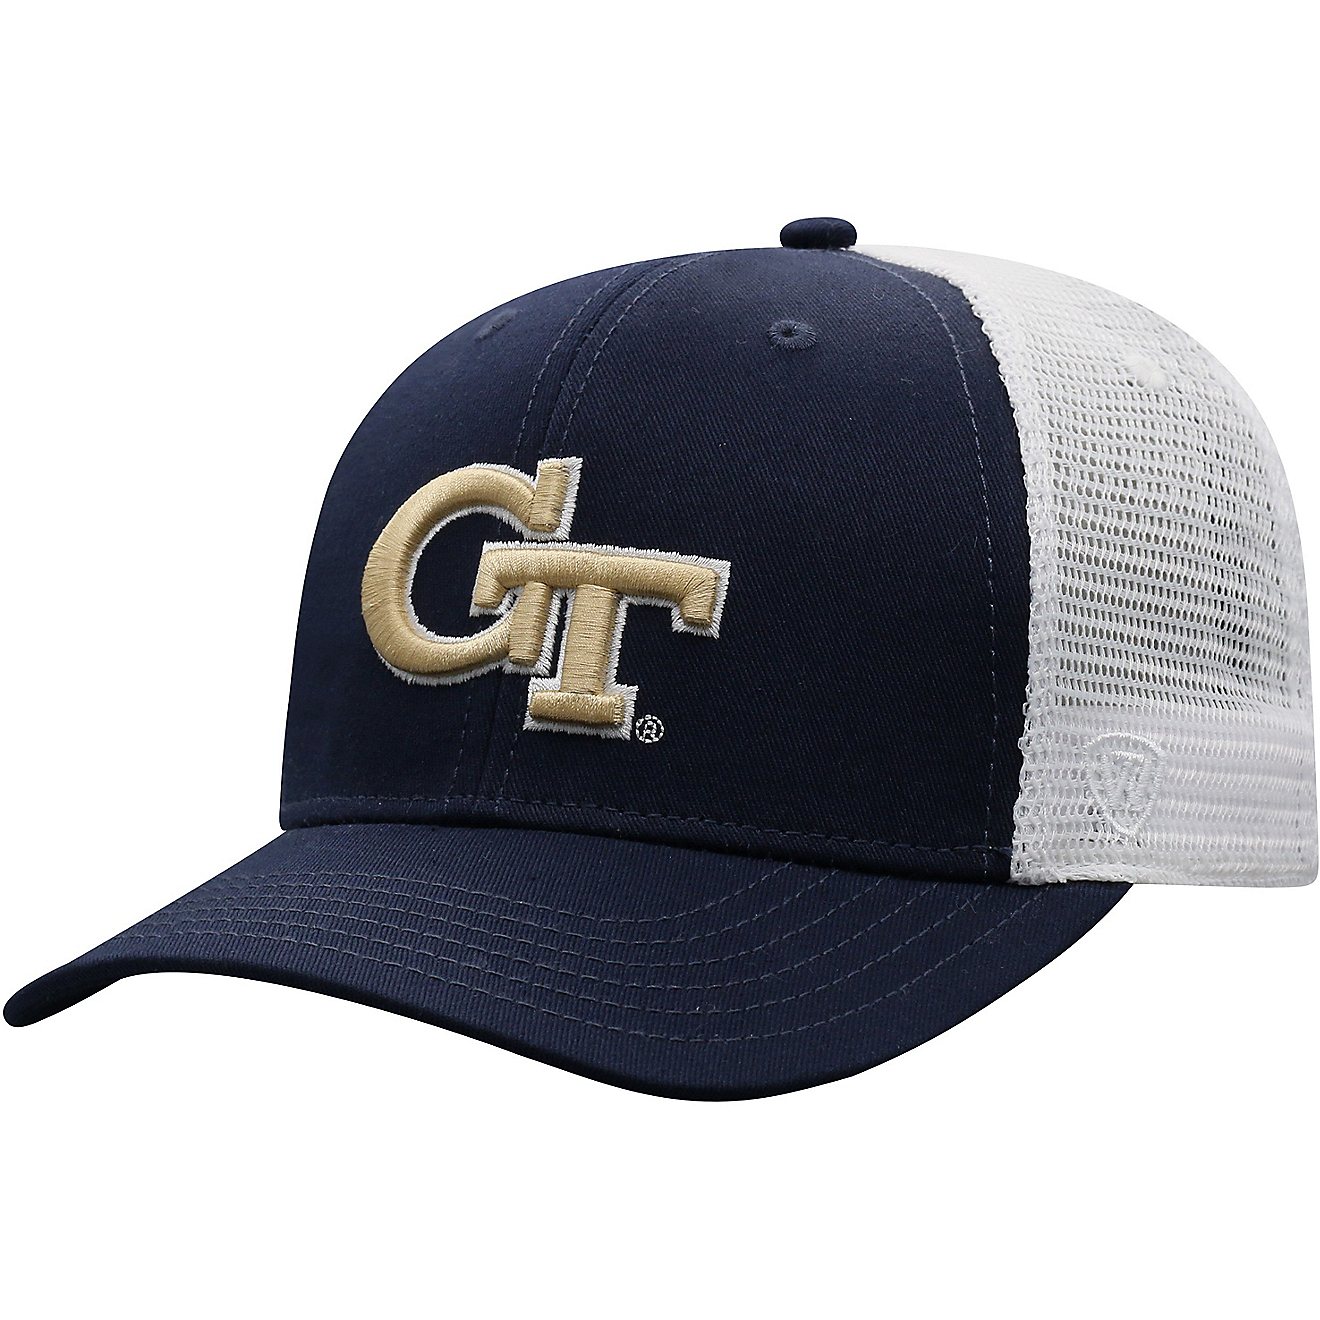 Top of the World Georgia Tech BB 2 Tone Adjustable Cap                                                                           - view number 3